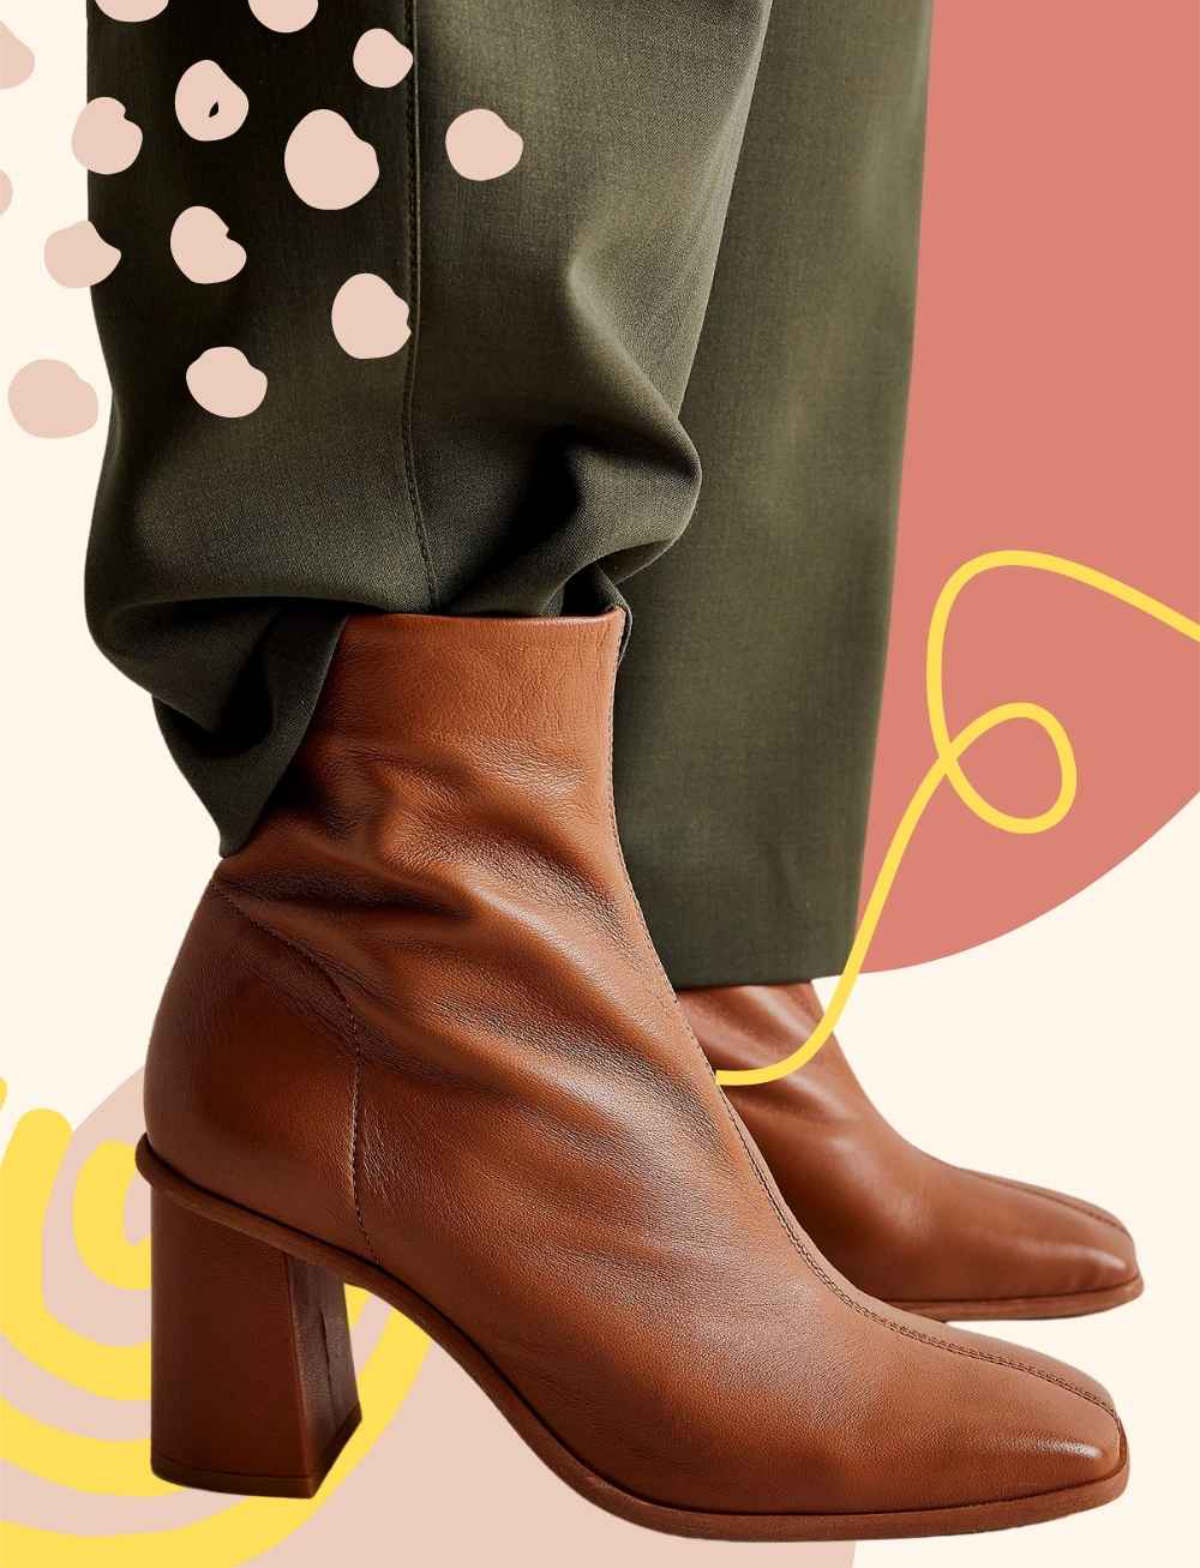 How To Wear Pants With Boots  Look Totally Fashionable